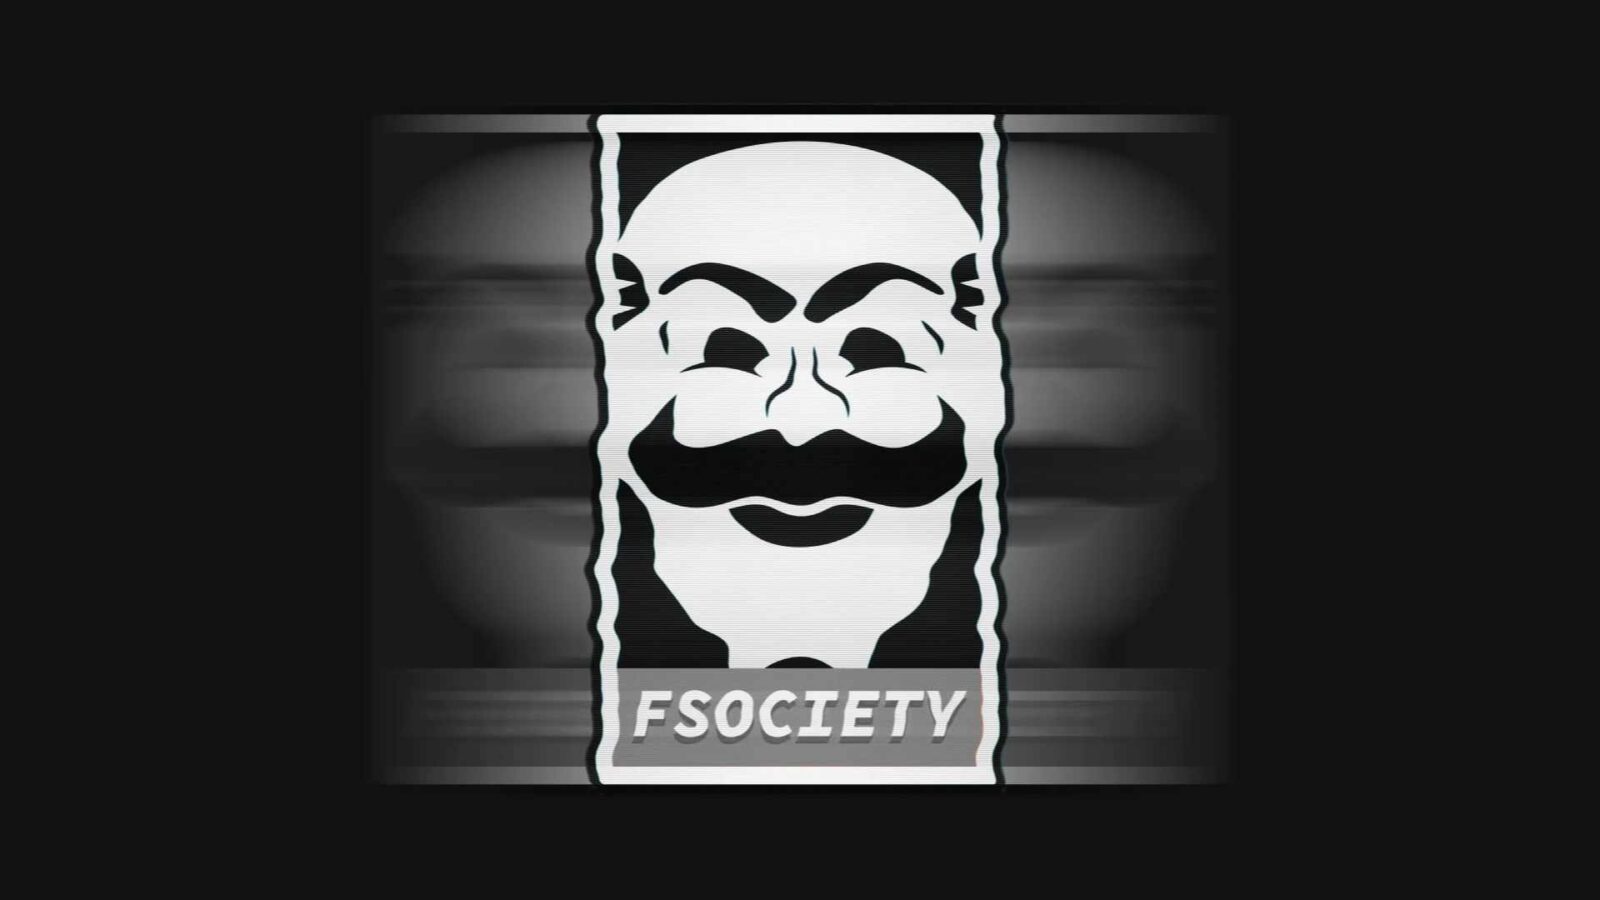 LiveWallpapers4Free.com | fsociety Hacker Group 4k Quality - Free Live Wallpaper